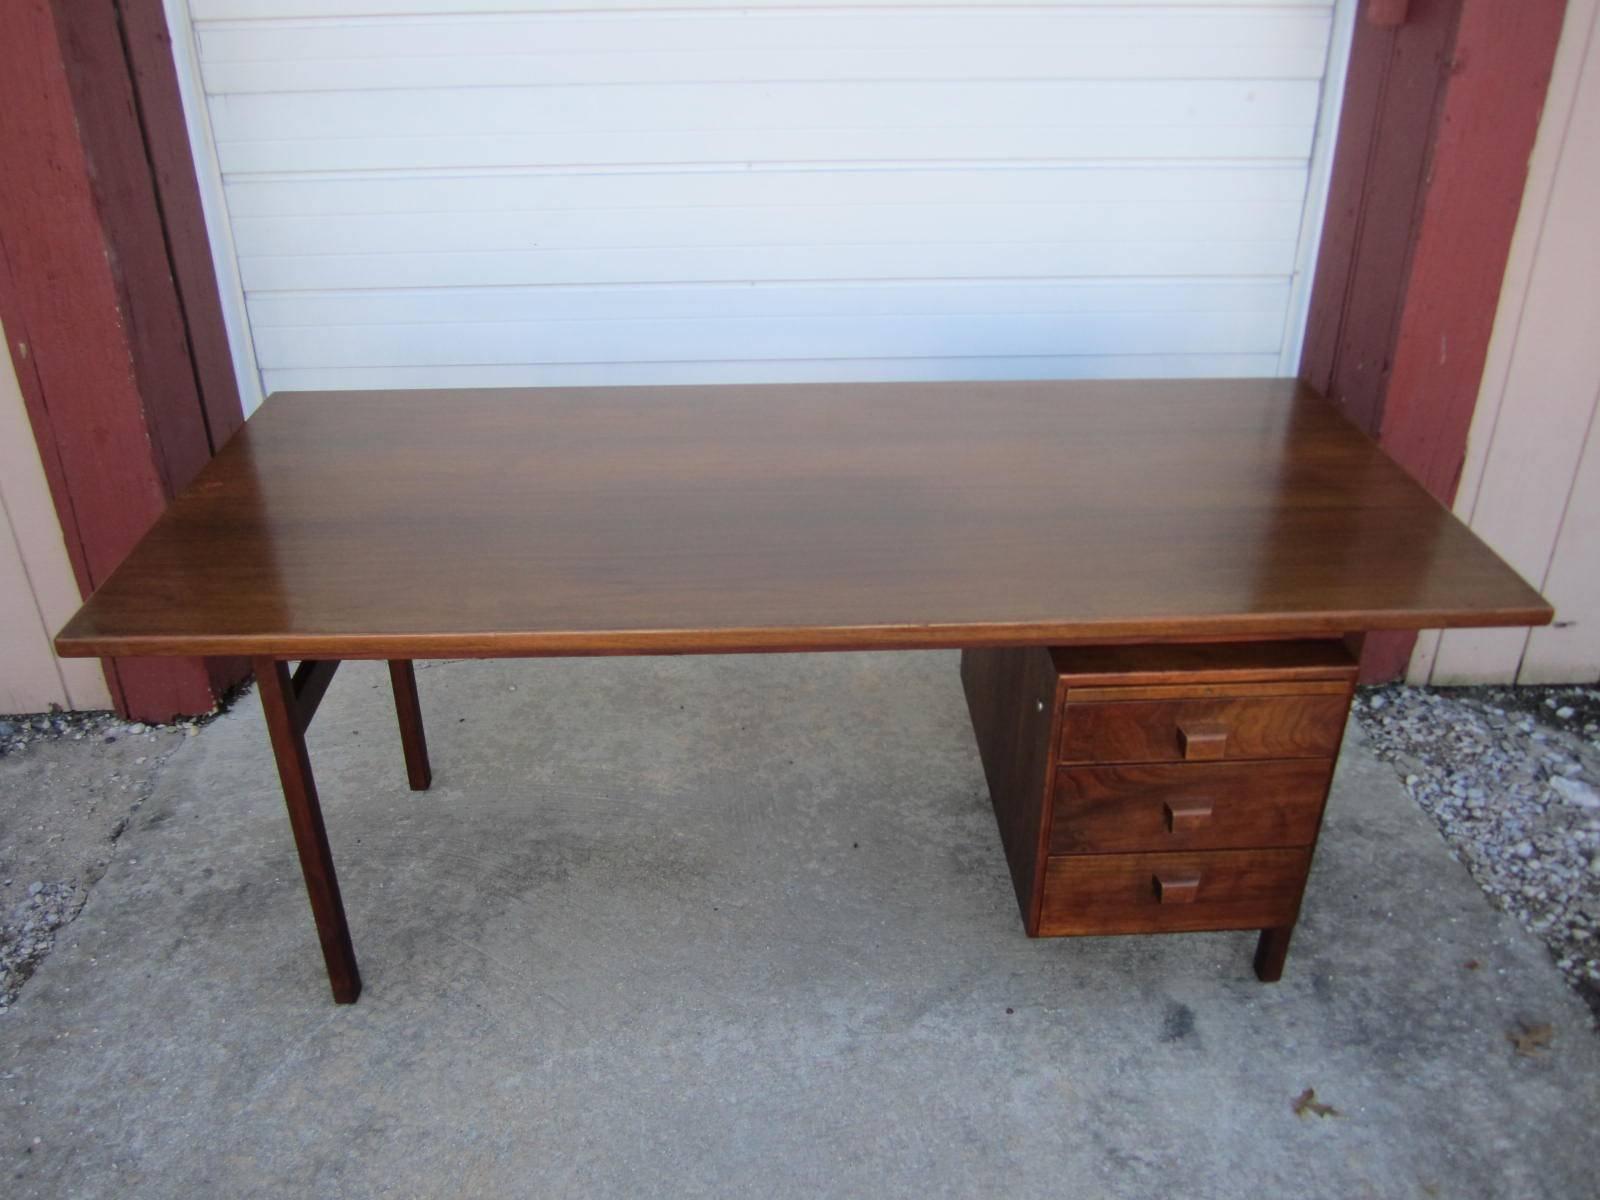 Handsome midcentury single-pedestal walnut desk made by Jens Risom. This desk features three drawers with a pencil drawer and a pull-out surface. This classic piece of modern Danish design will look great in any home or office.